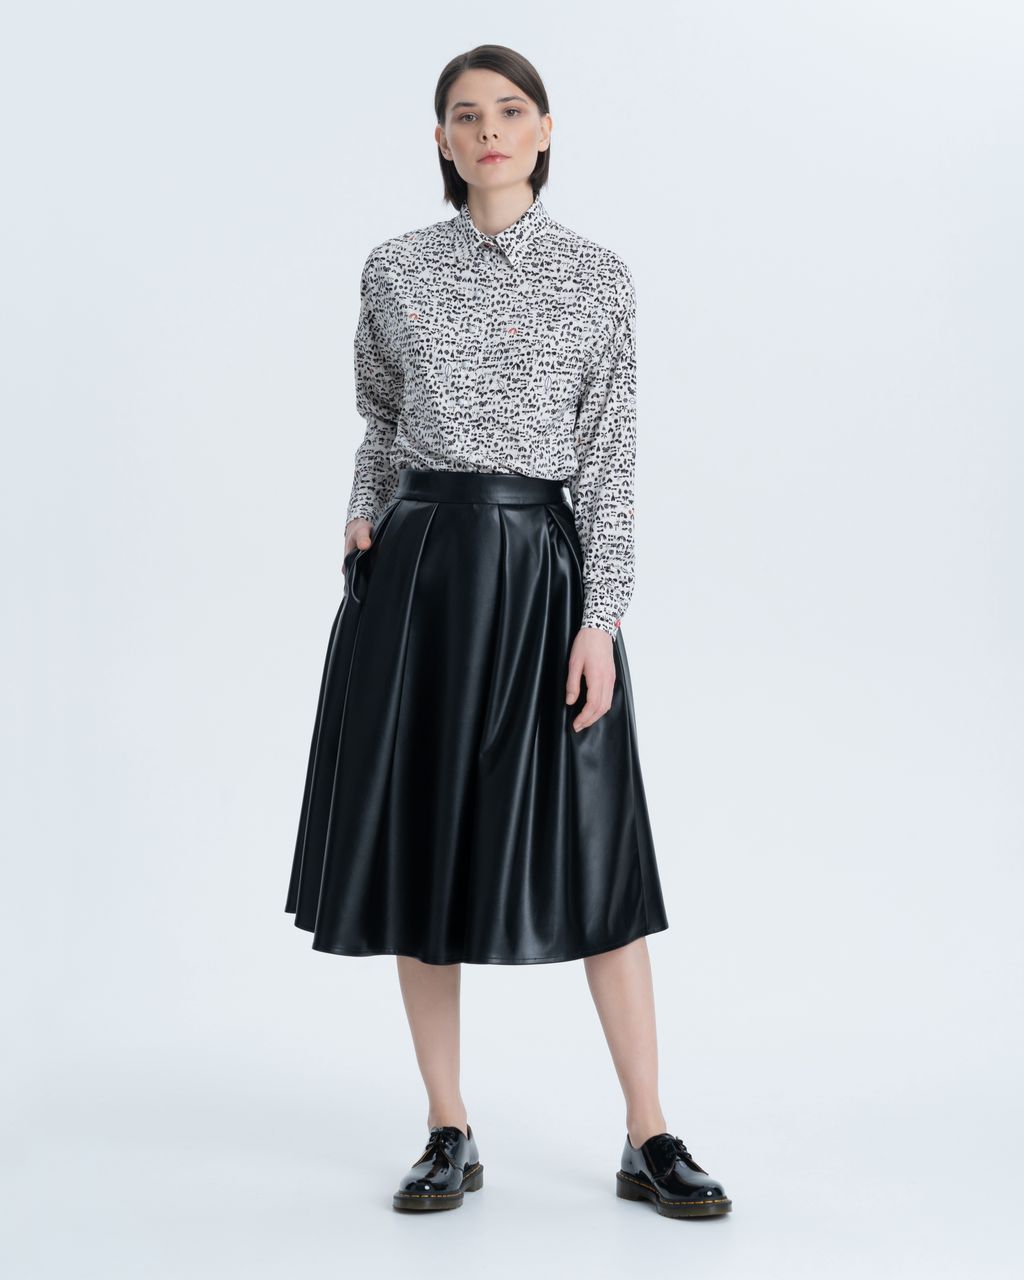 Eco-leather skirt with original pleats and pockets in the side seams. On a thin viscose lining with a metal zipper on the back.